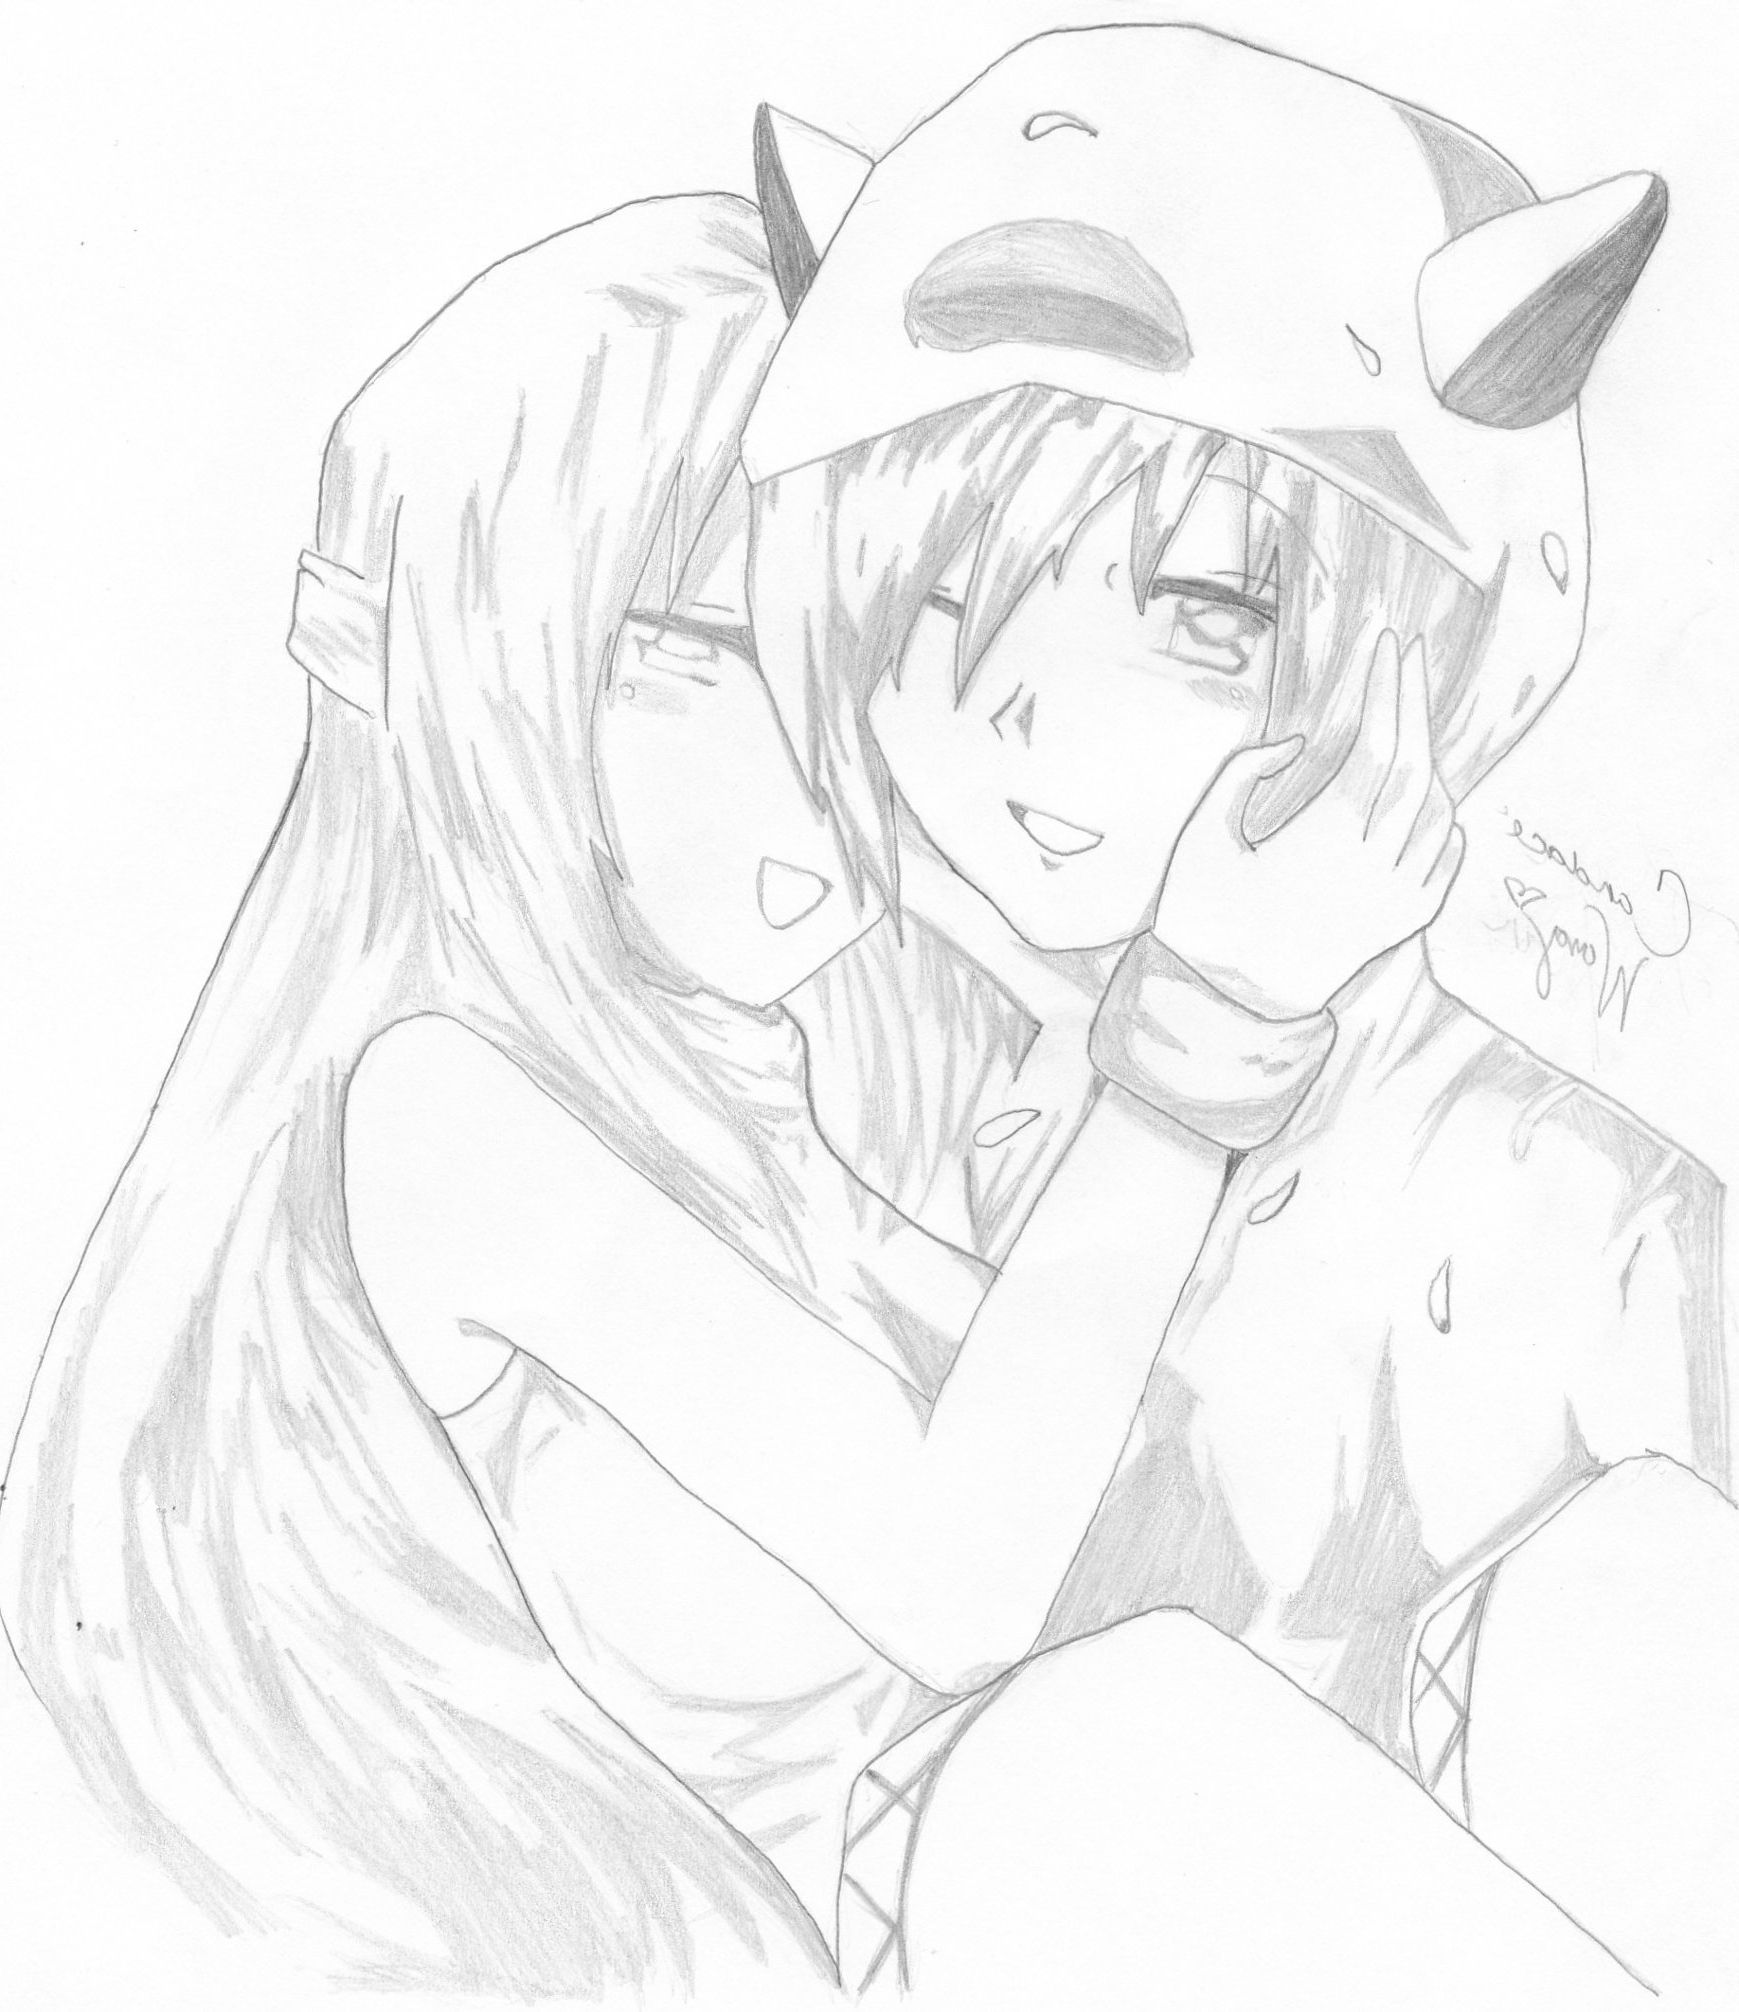 drawings of anime couples kissing